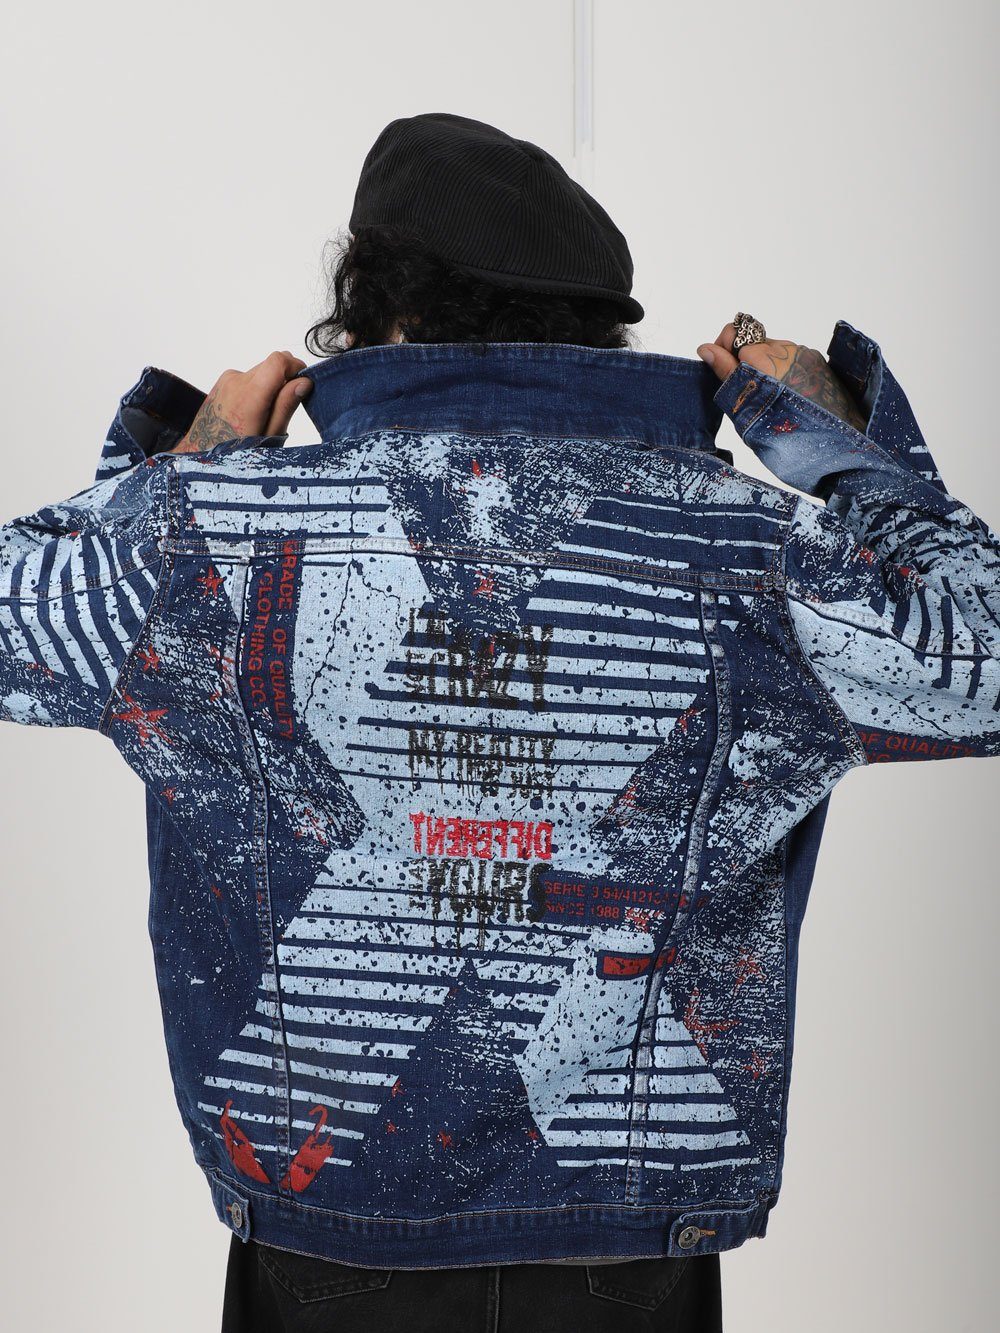 The back of a man wearing a CRAZY CAT denim jacket.